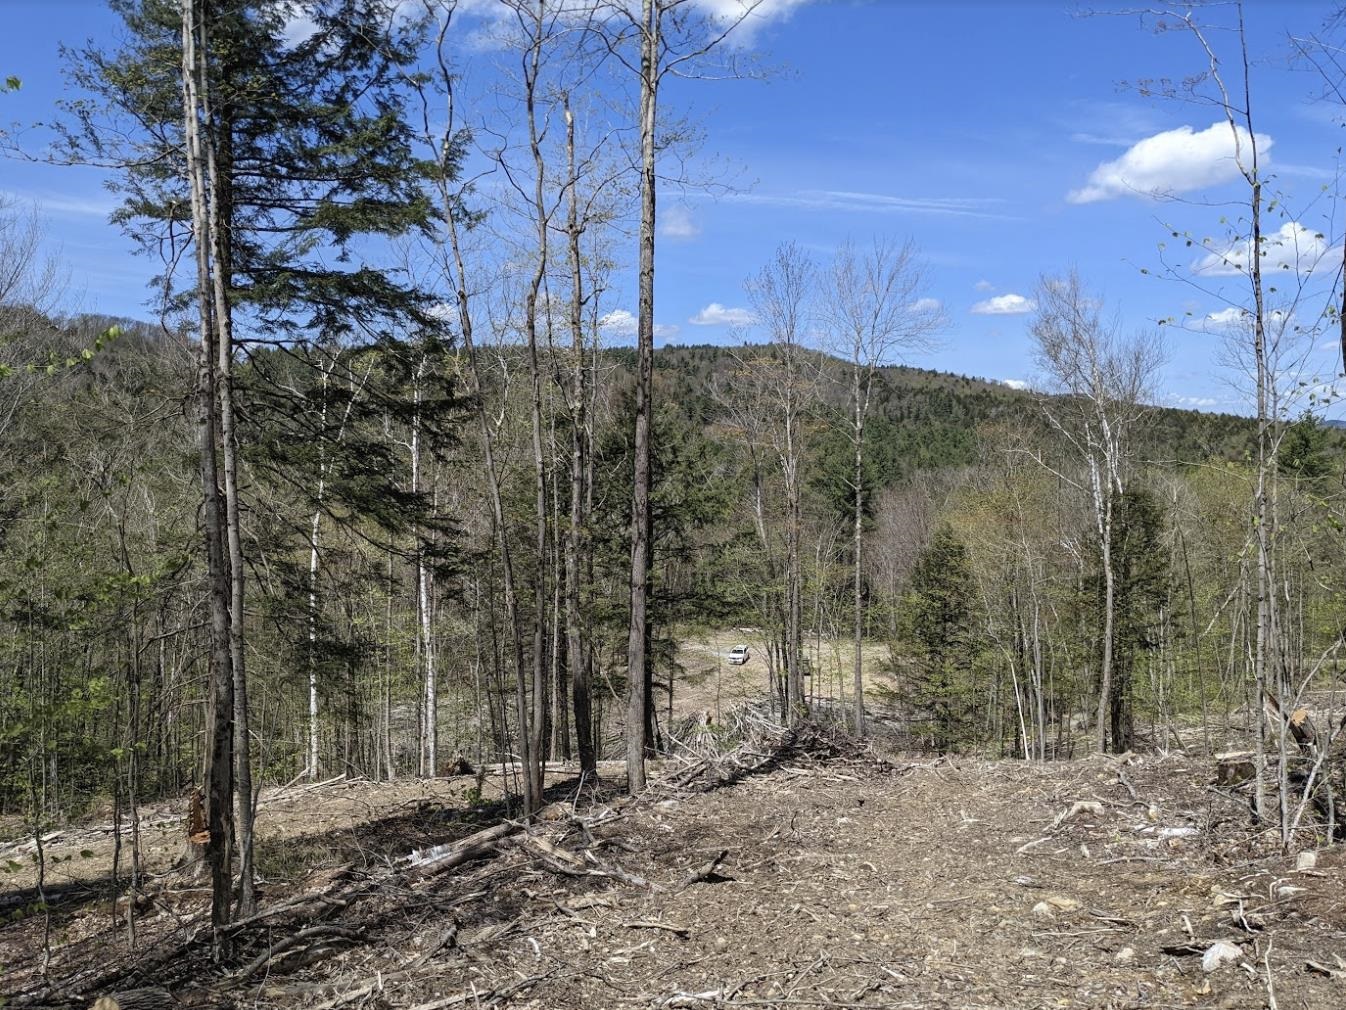 58.7  Acres in Windham VT. This Parcel is a...